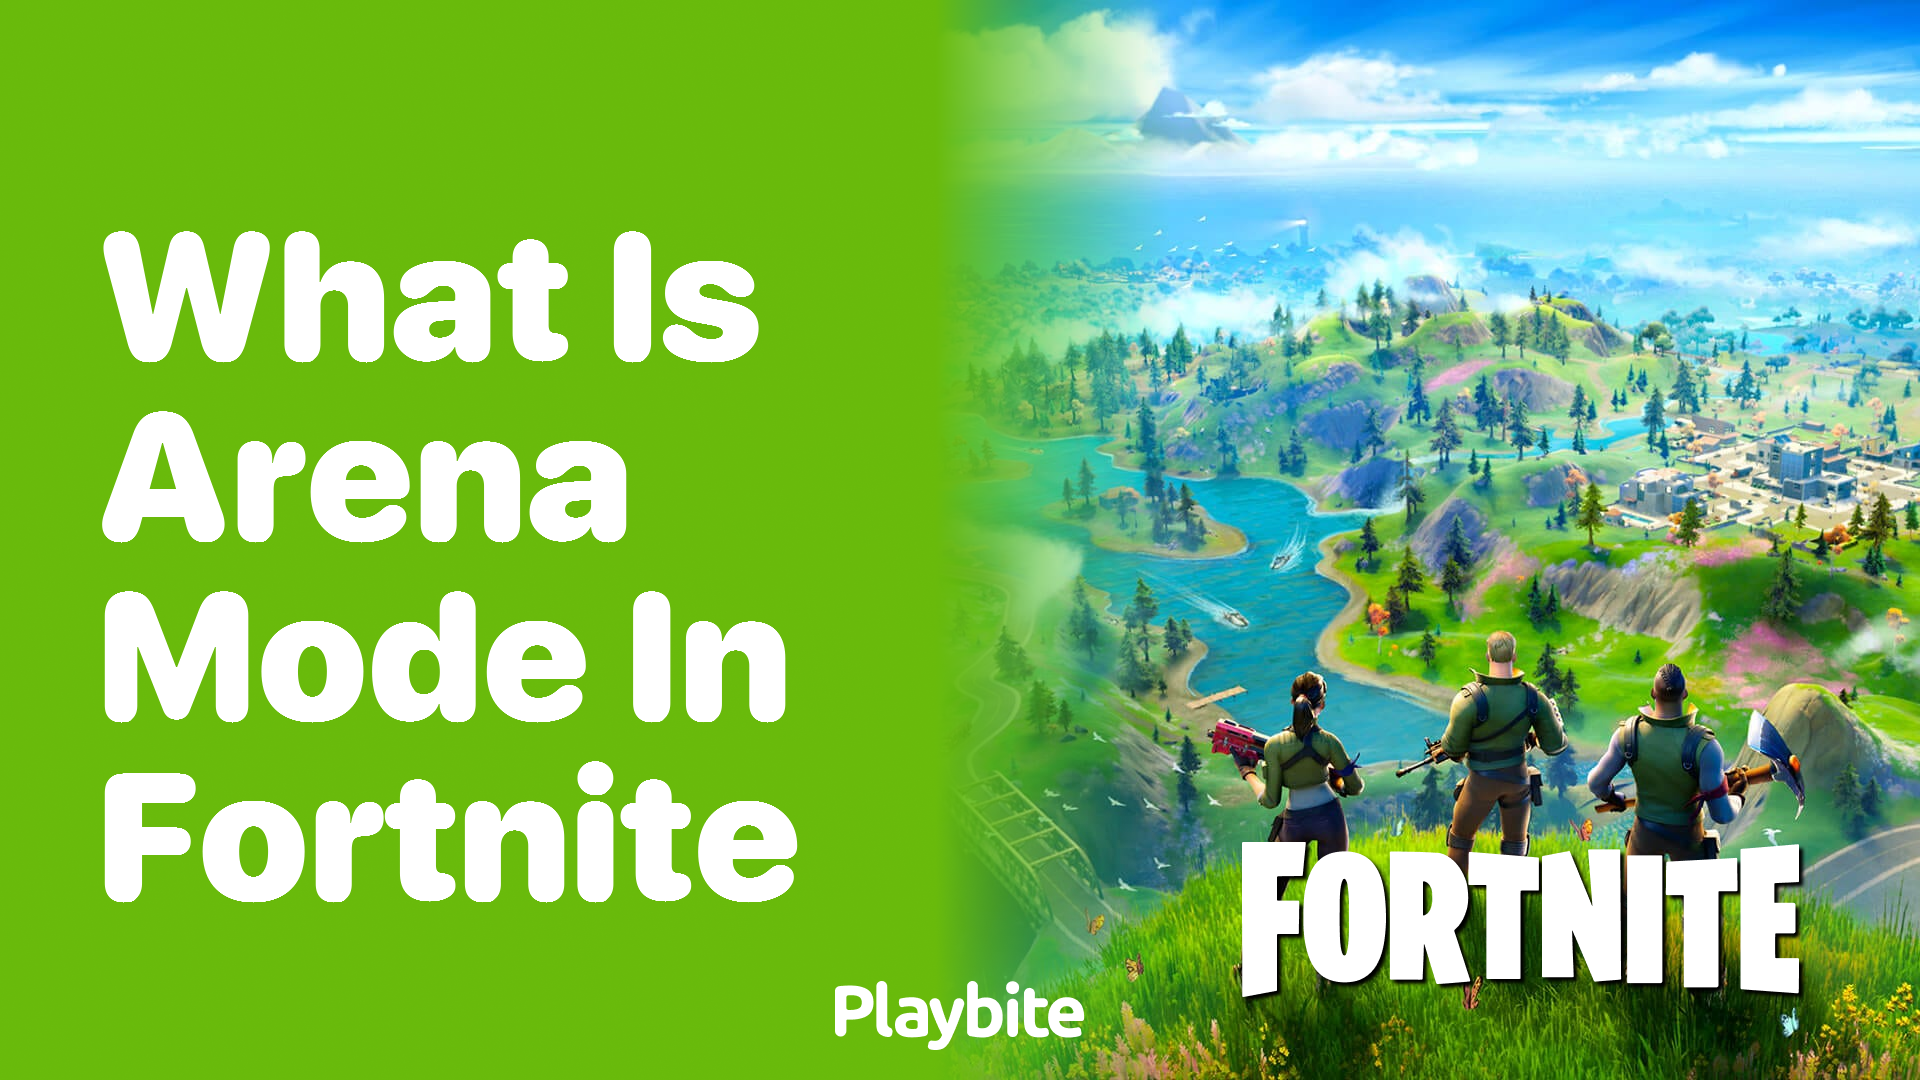 What is Arena Mode in Fortnite?